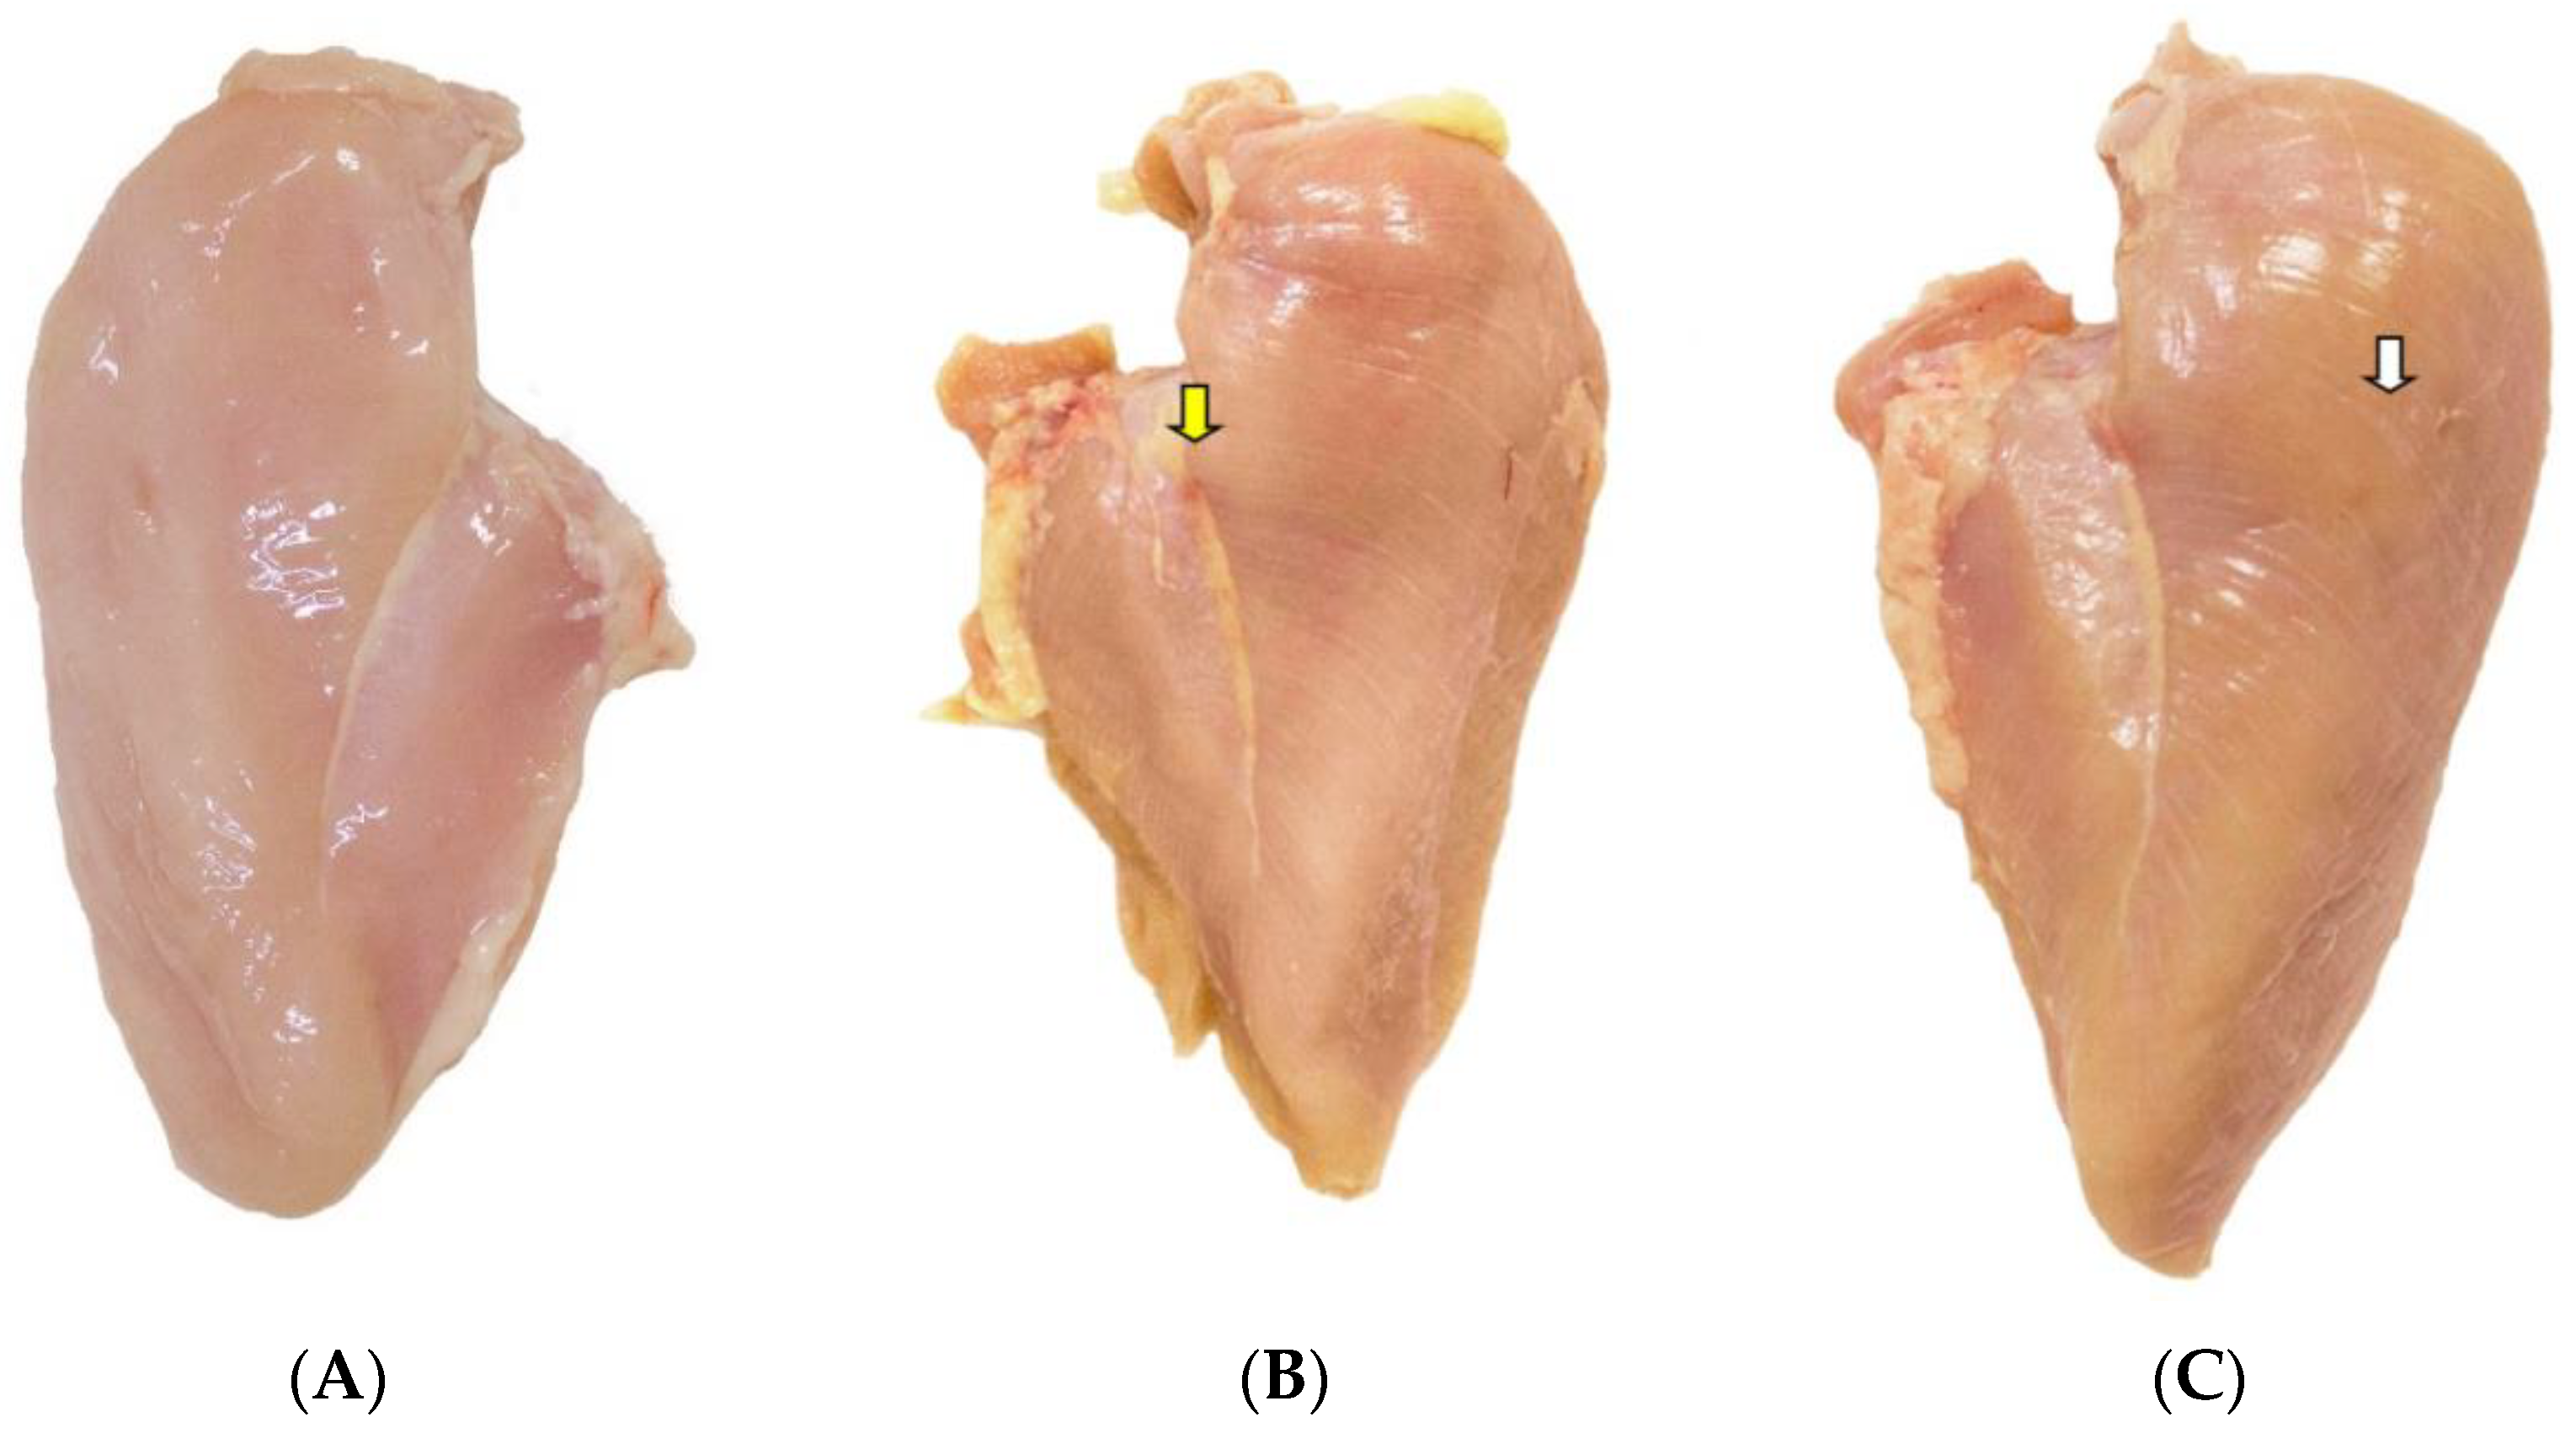 Is Wooden Breast syndrome simply another name for Chicken Diabetes ?